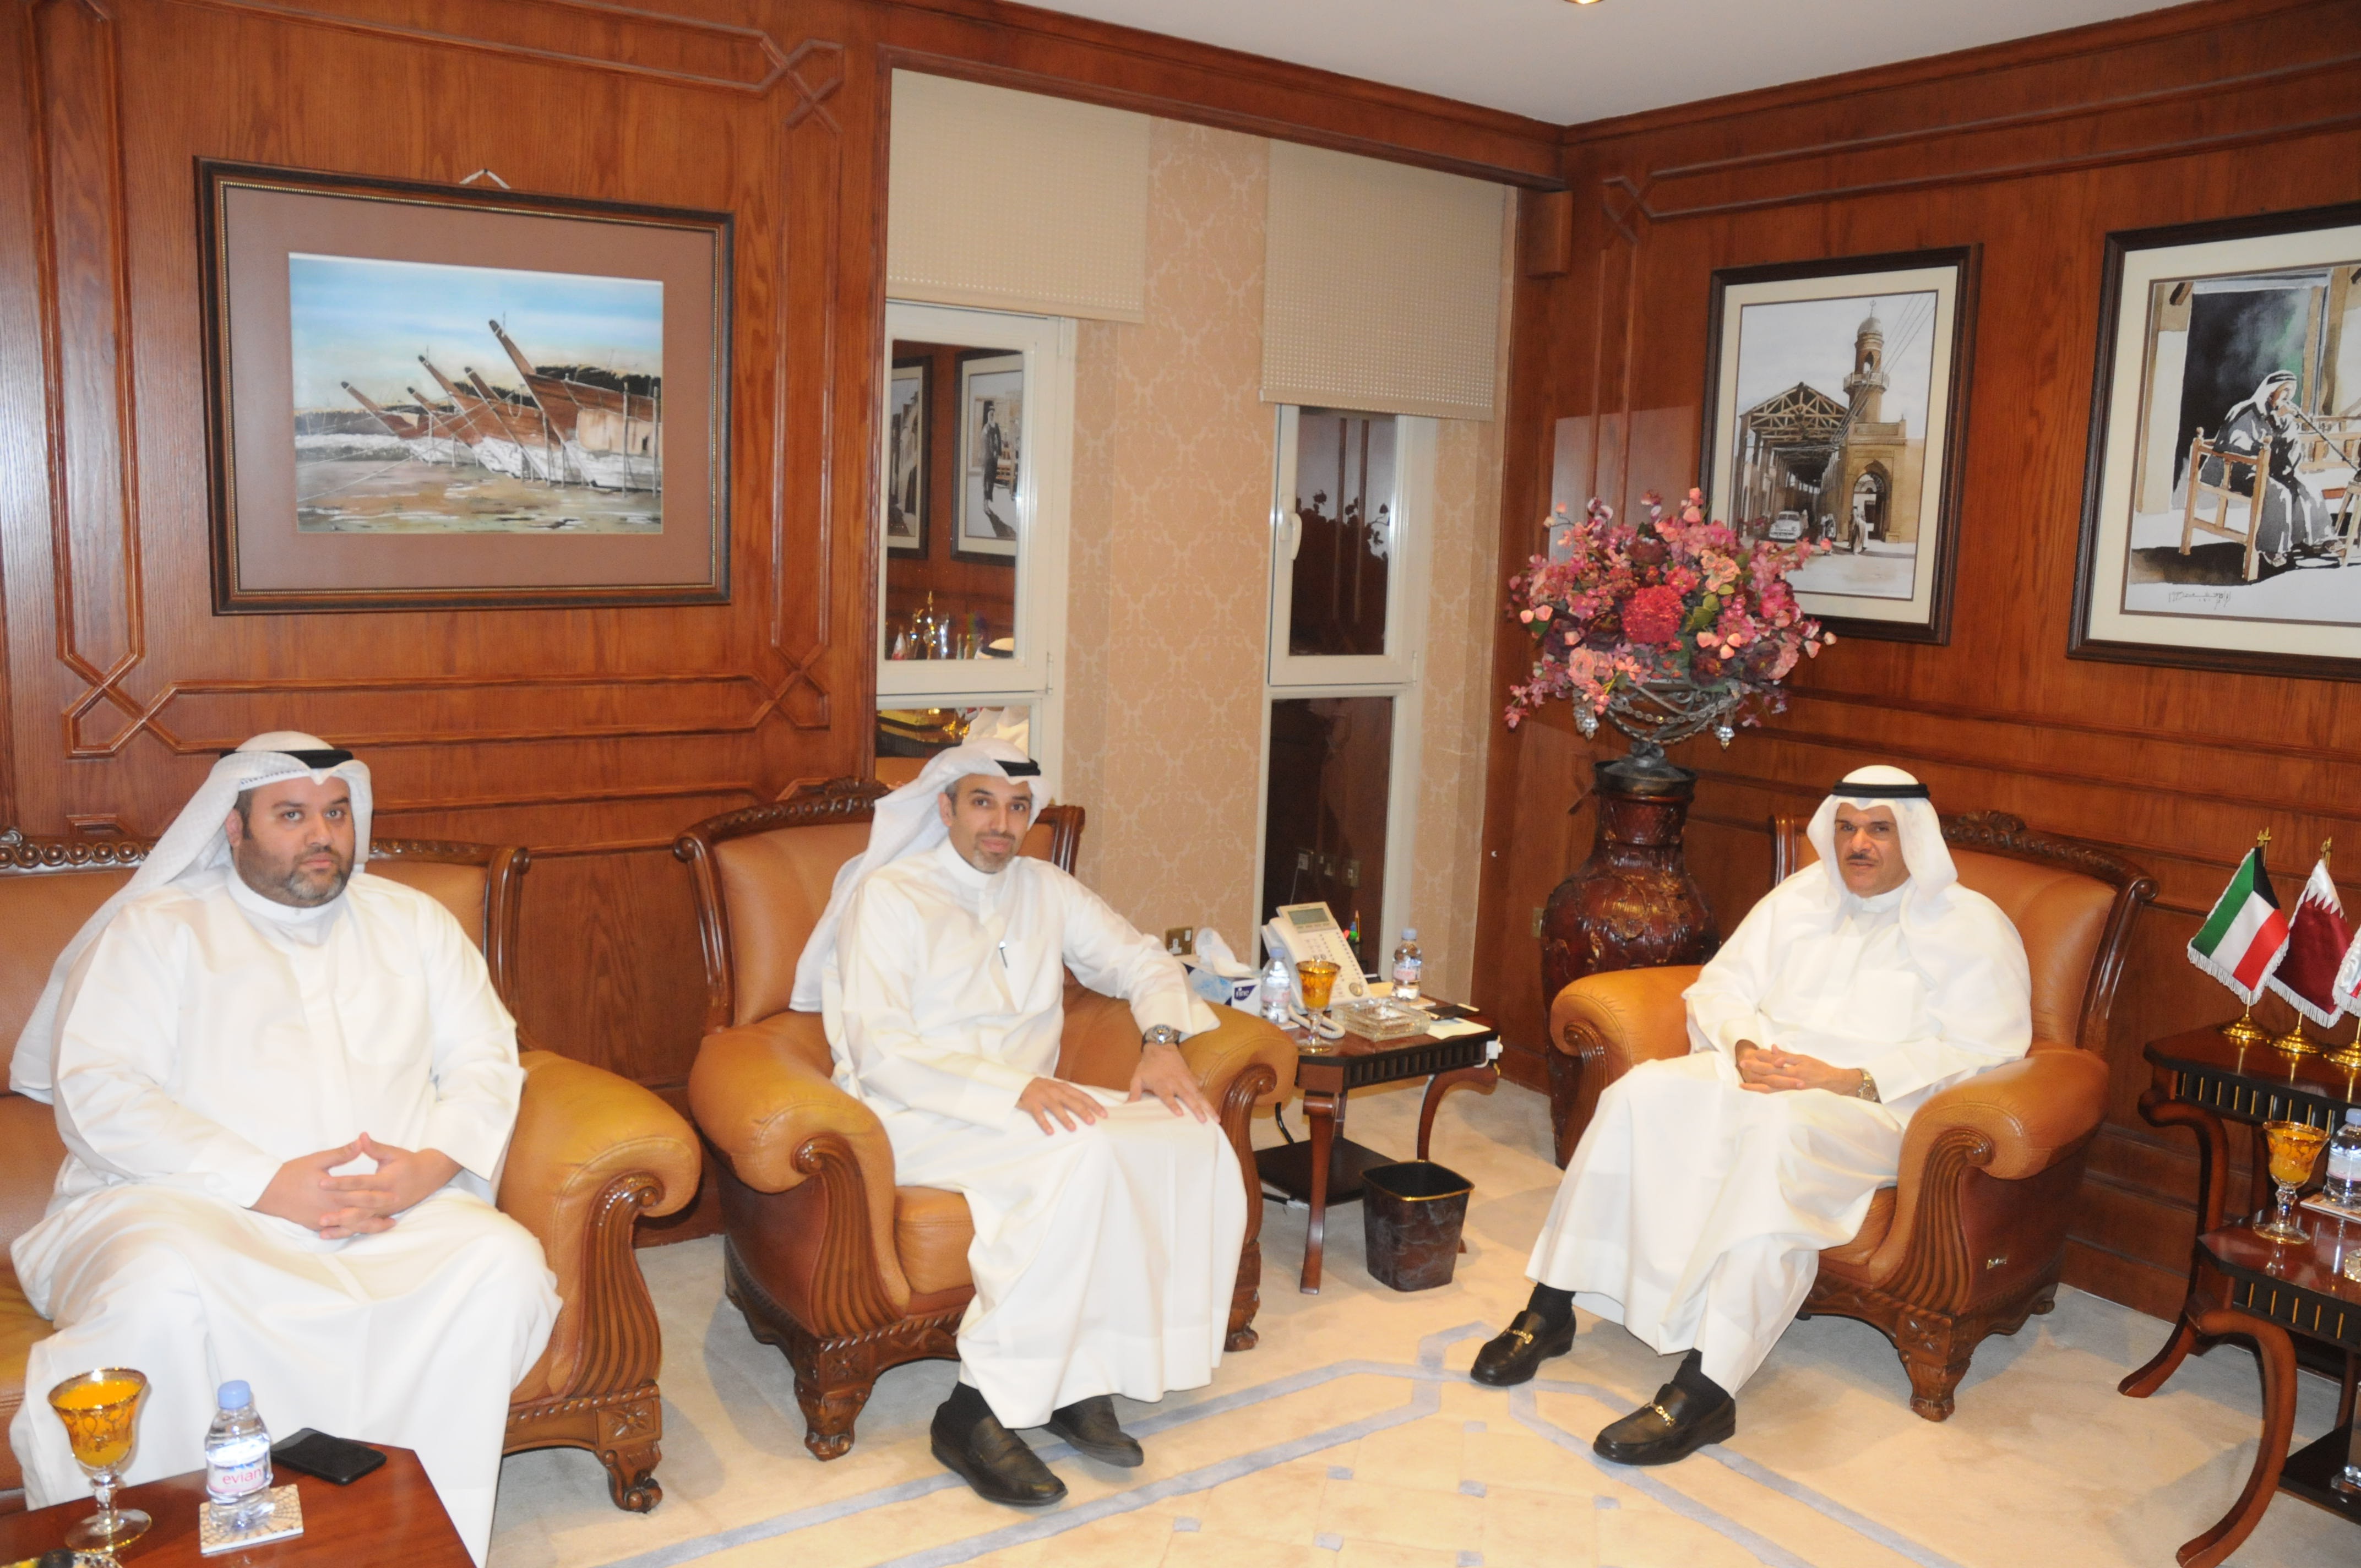 Minister of Information and Minister of State for Youth Affairs Sheikh Salman Sabah Salem Al-Humoud Al-Sabah  while meeting with Chief Editor of Kuwait Times Abd Al-Rahman Al-Alyan, accompanied by Ziad Al-Alyan